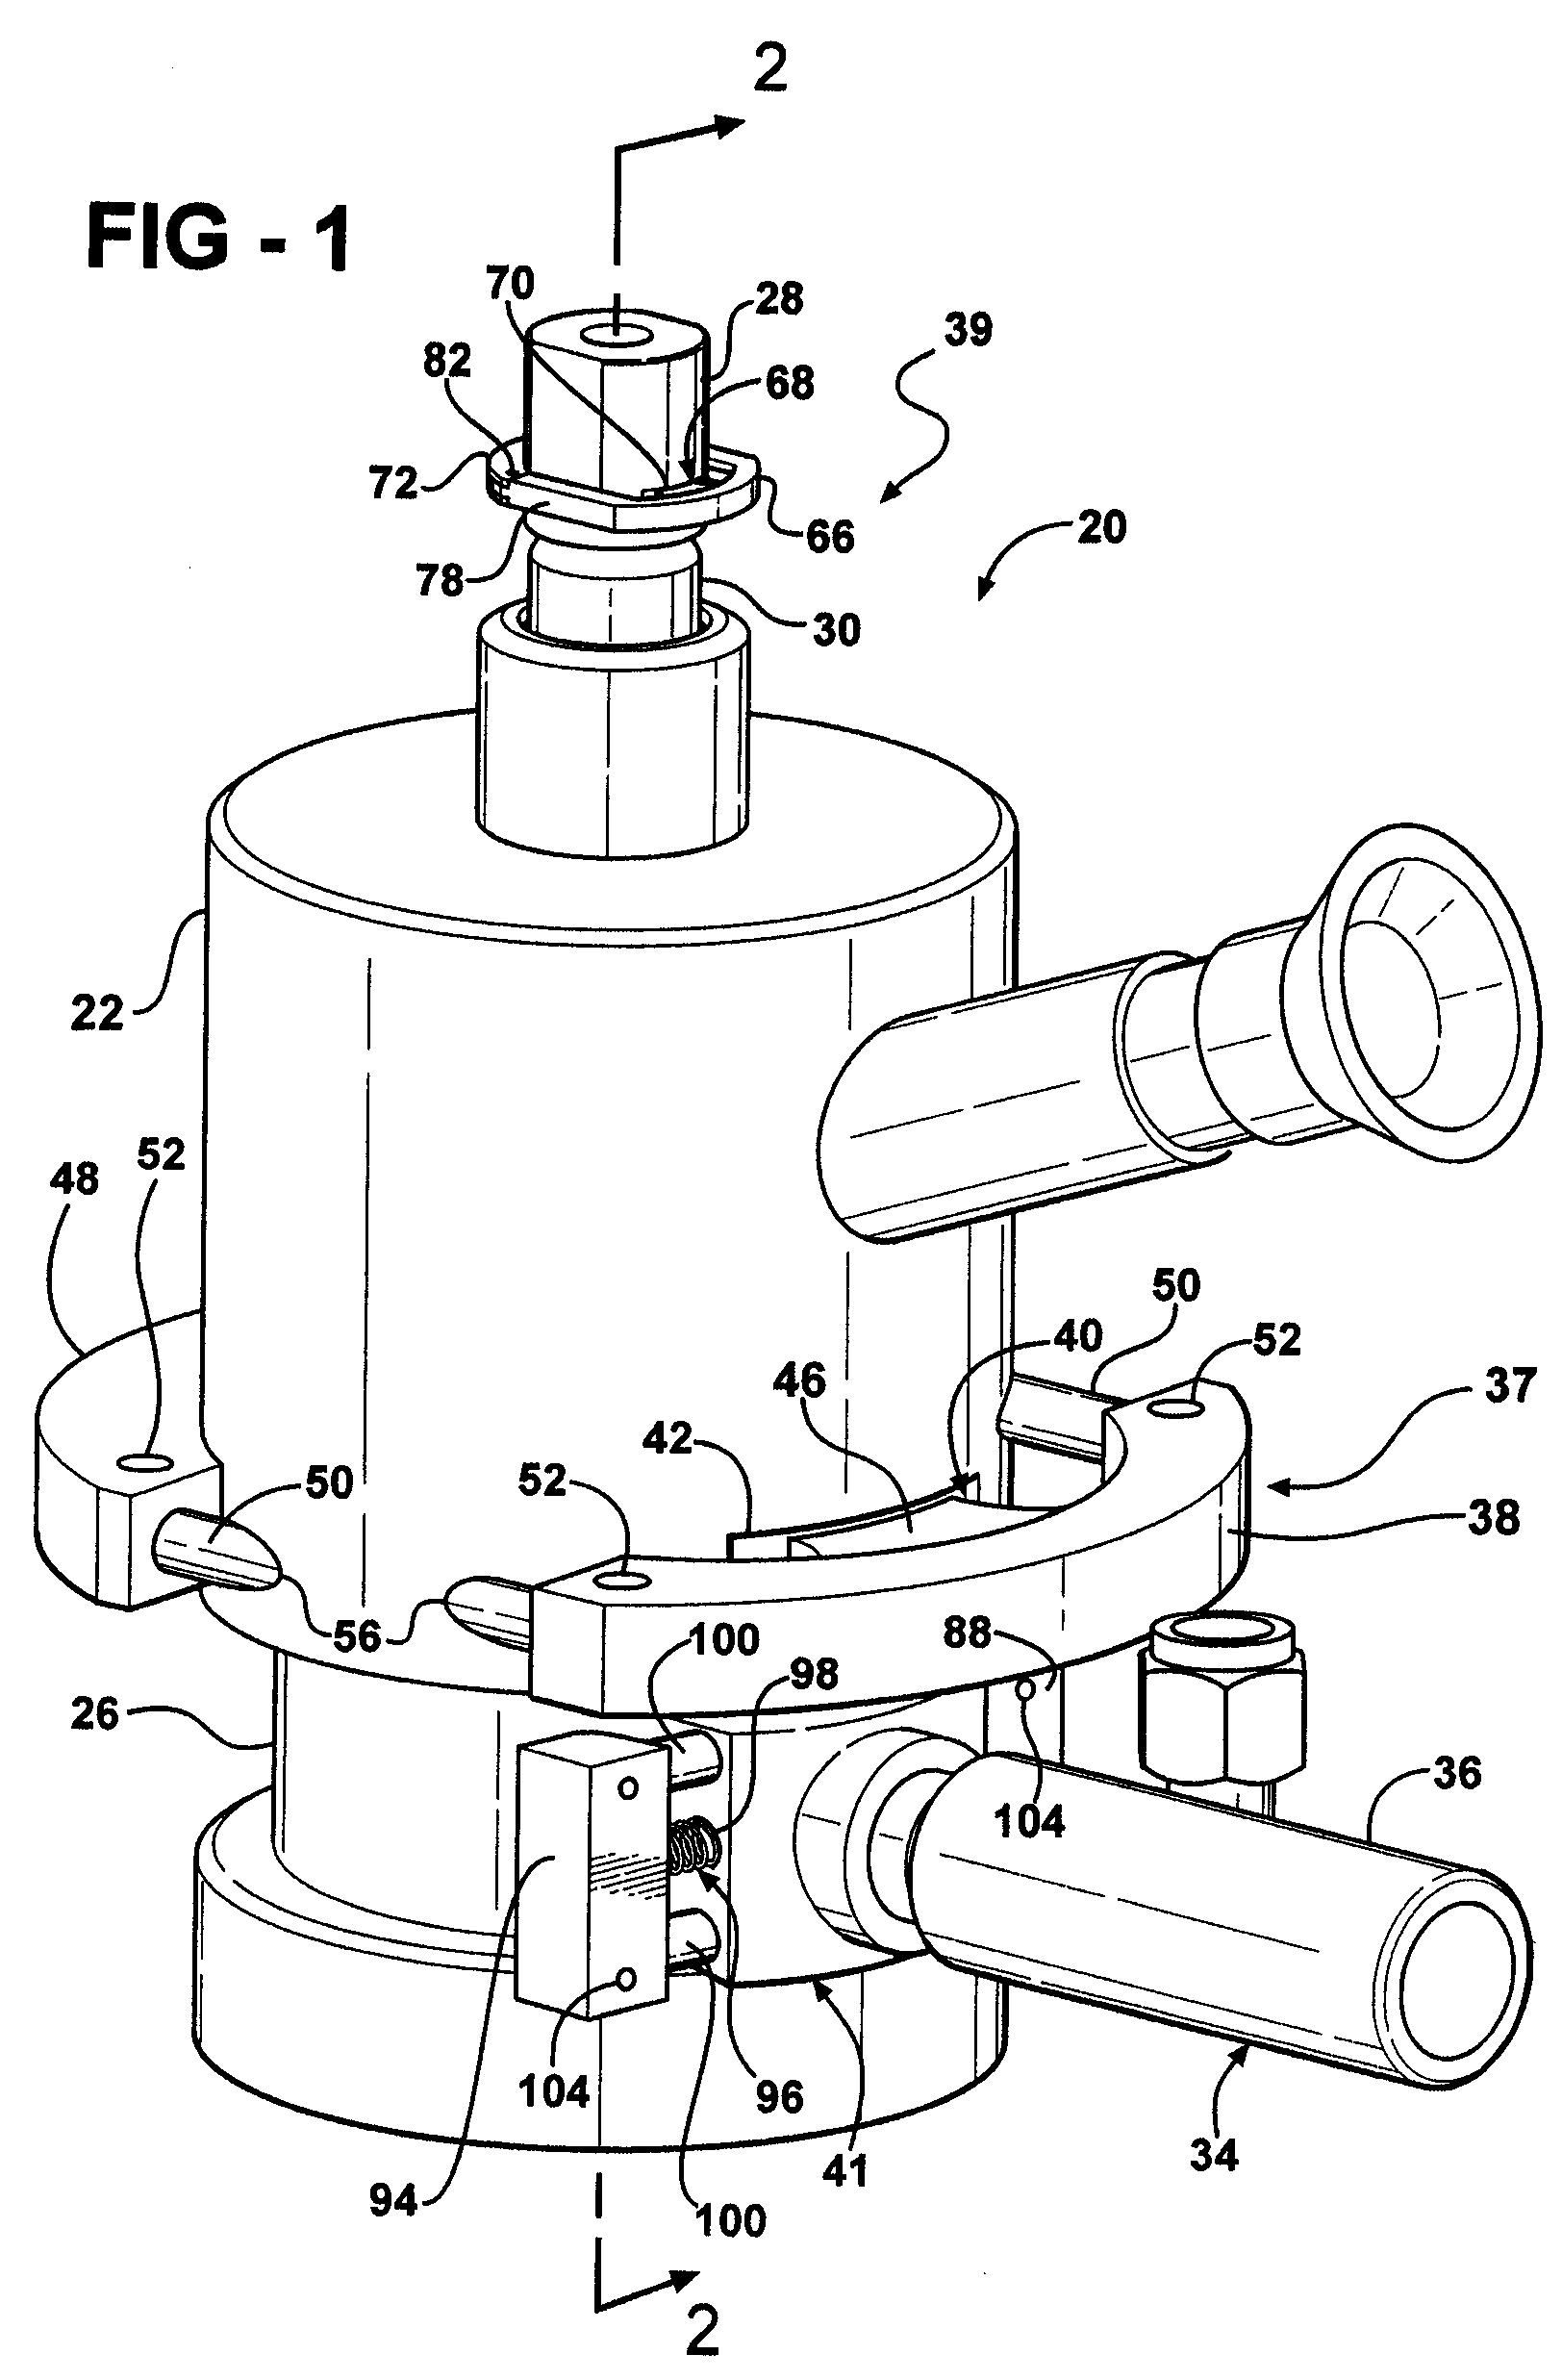 Filling valve apparatus for a beverage filling machine